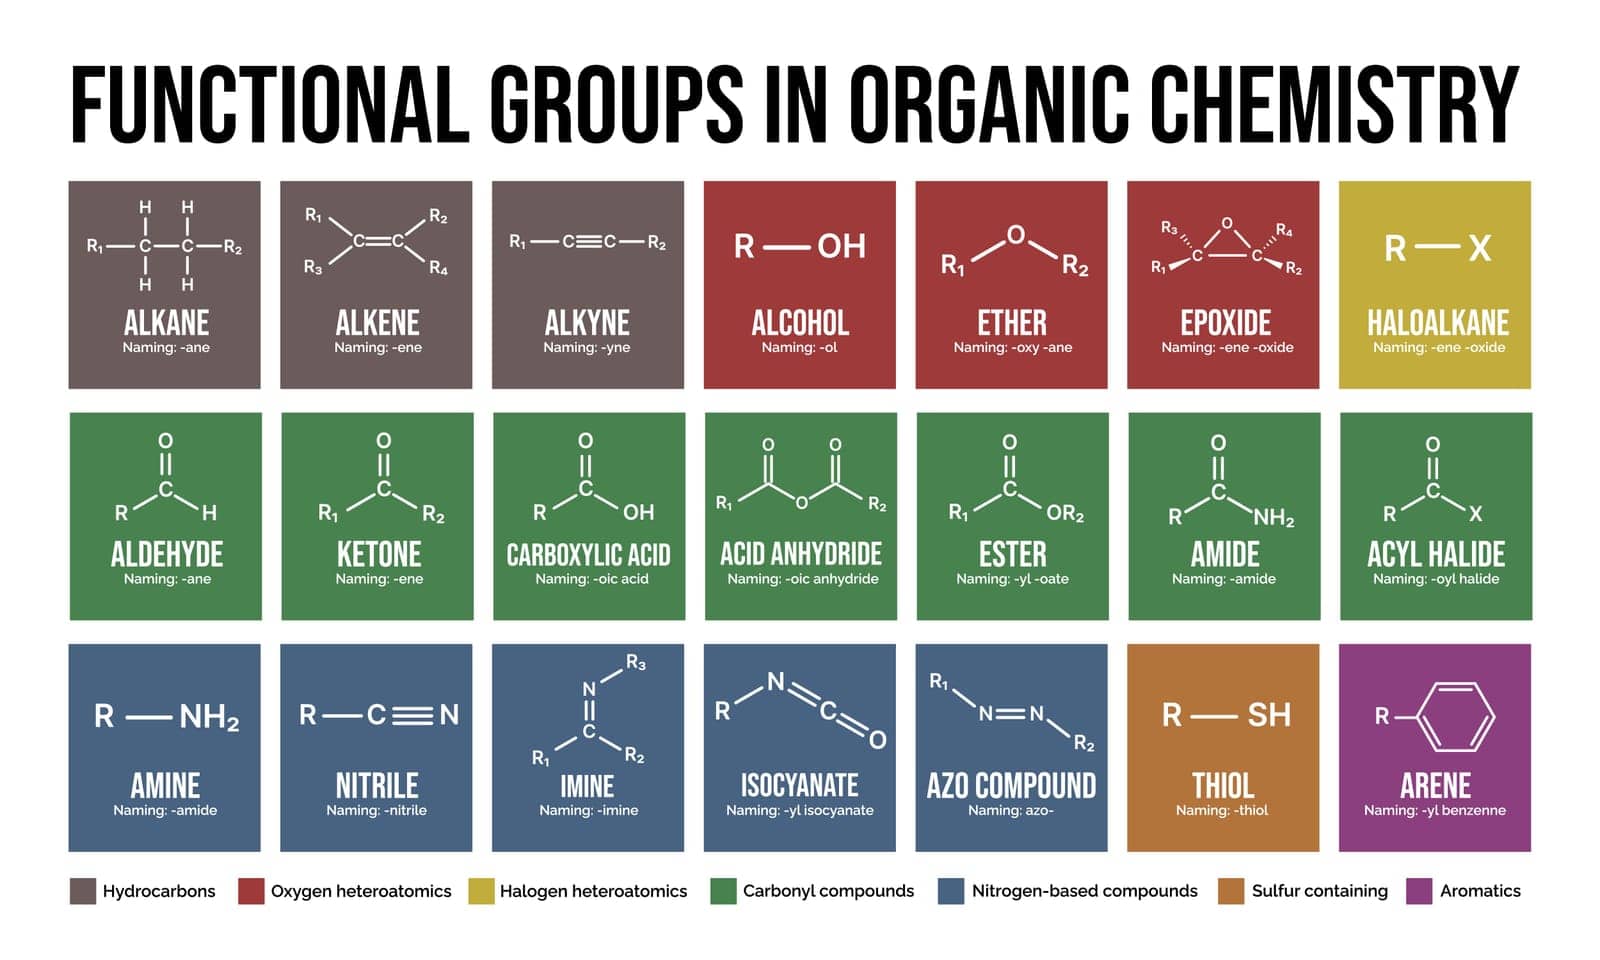 Functional groups in organic chemistry. by AnnaMarin